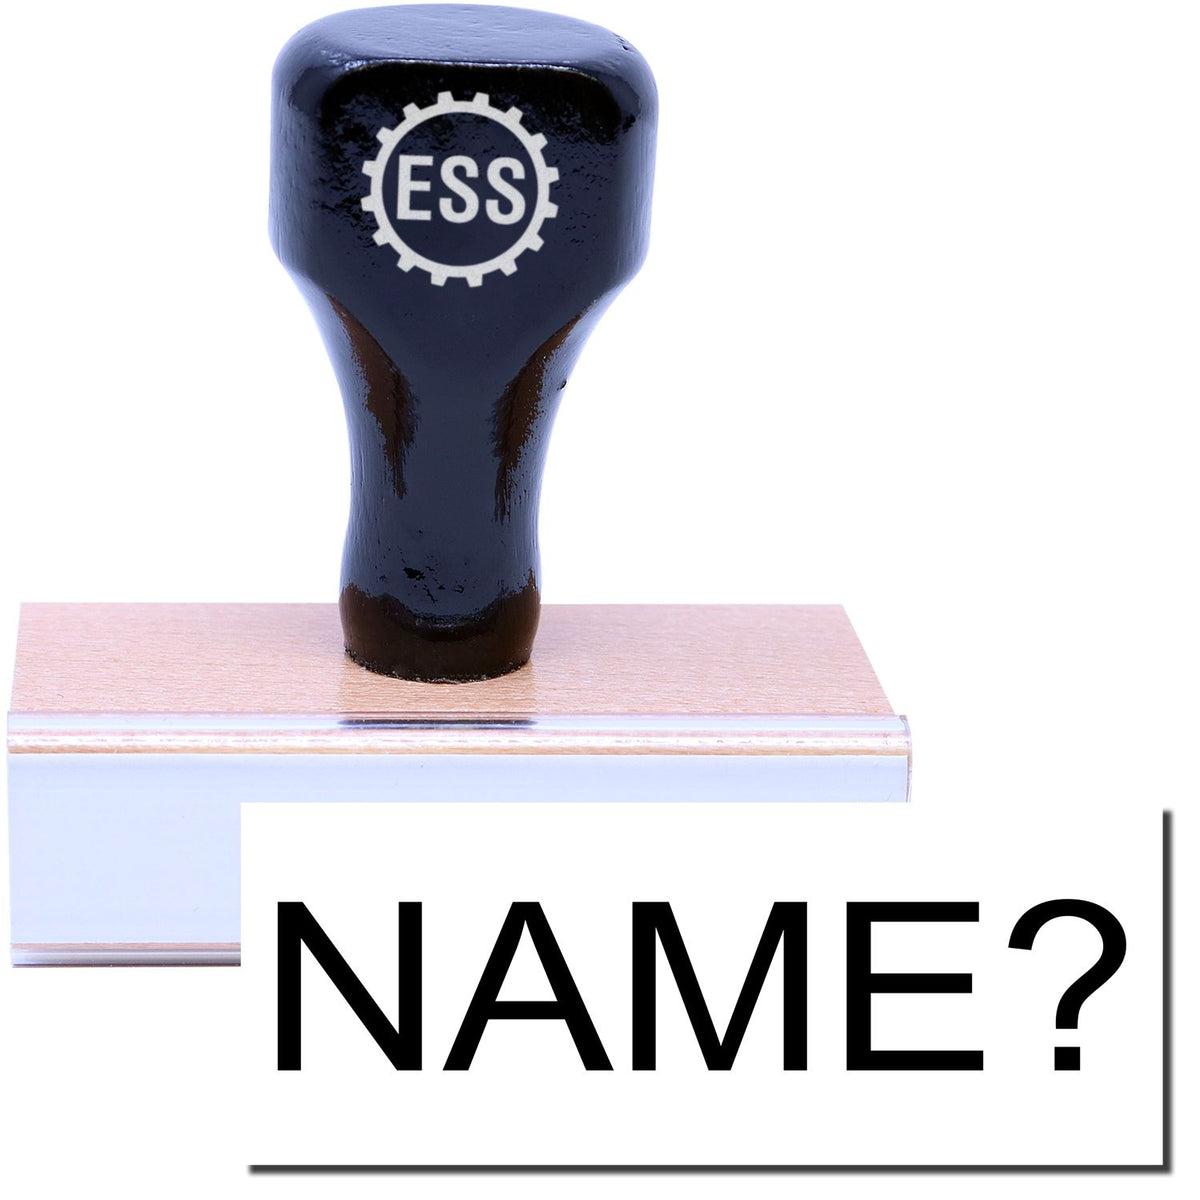 A stock office rubber stamp with a stamped image showing how the text &quot;NAME?&quot; in a large font is displayed after stamping.